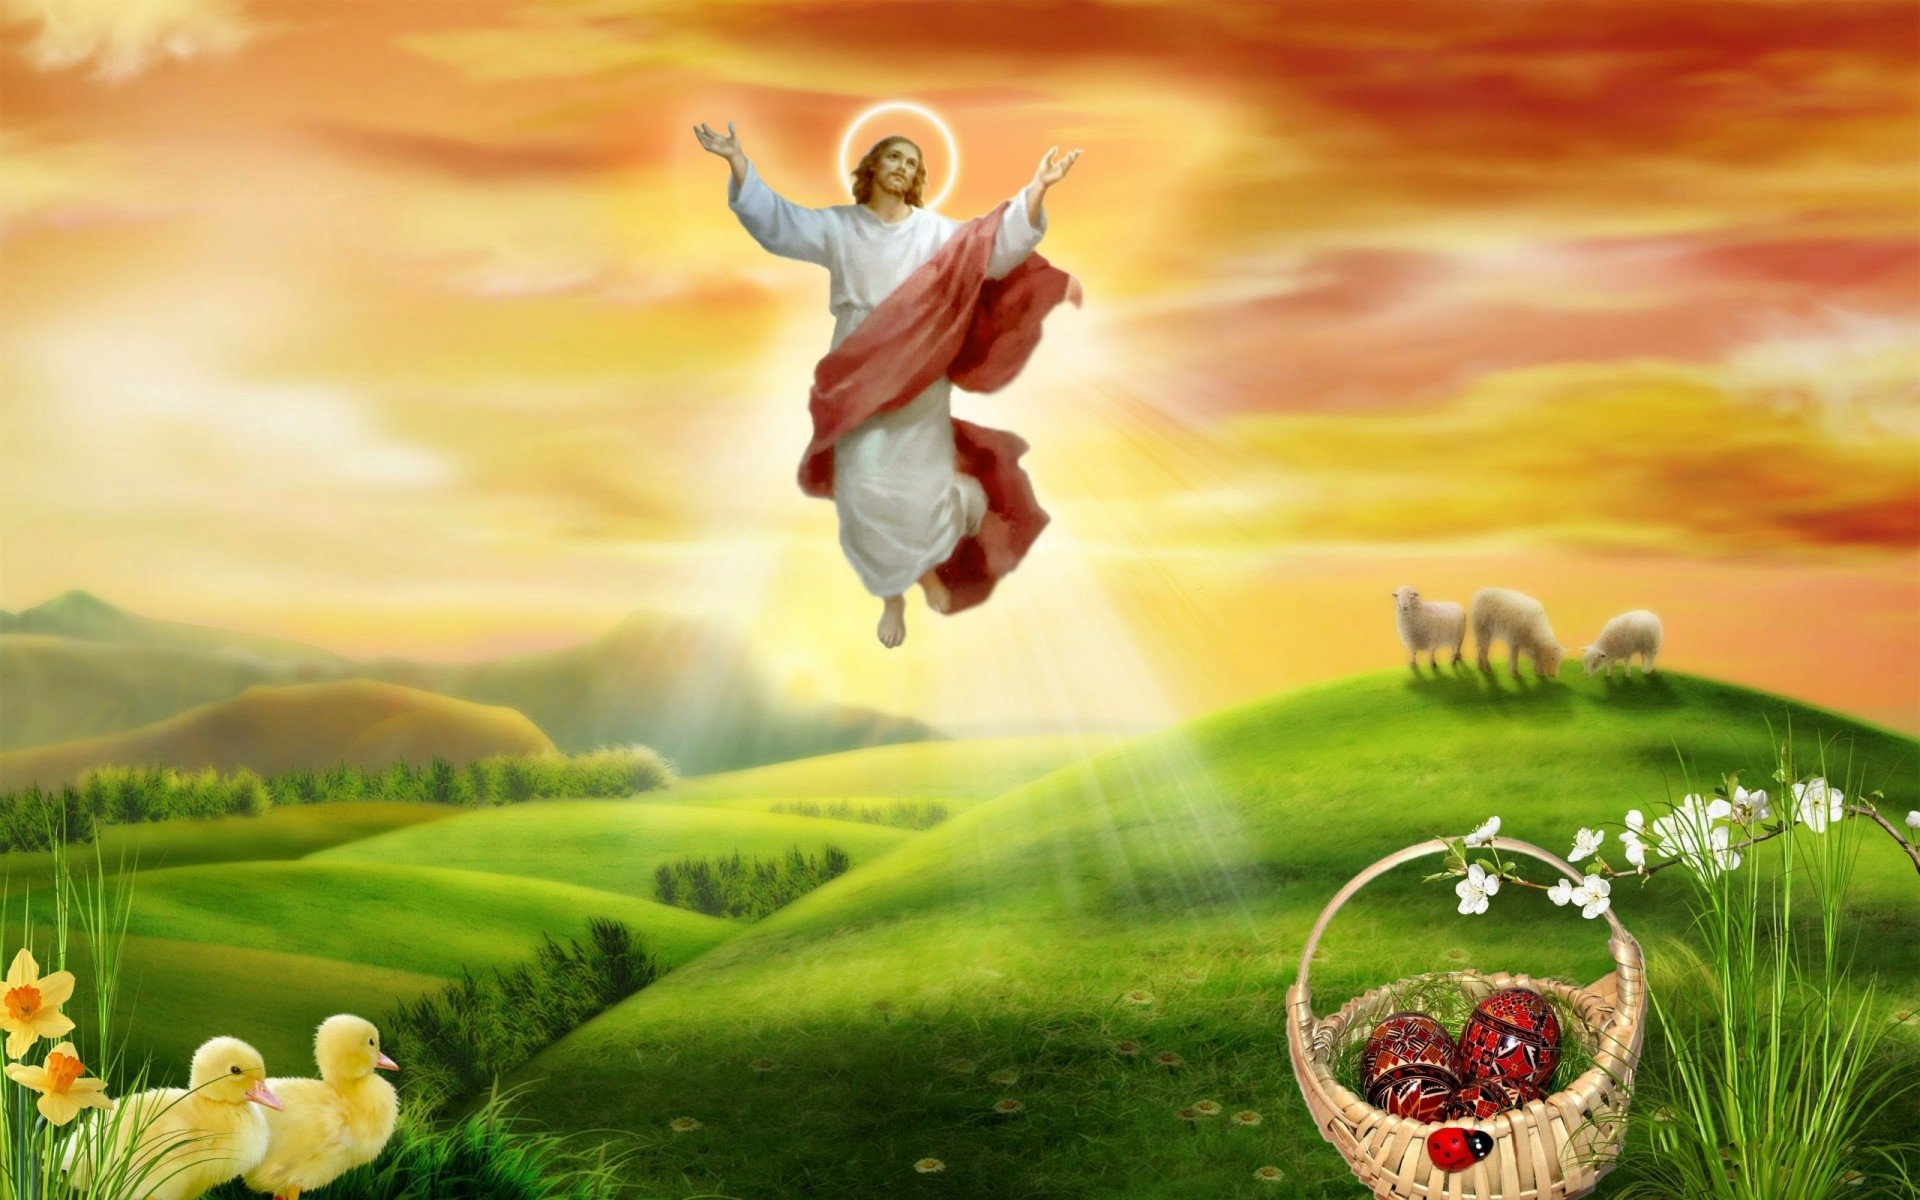 Jesus Animation Stock Video Footage for Free Download